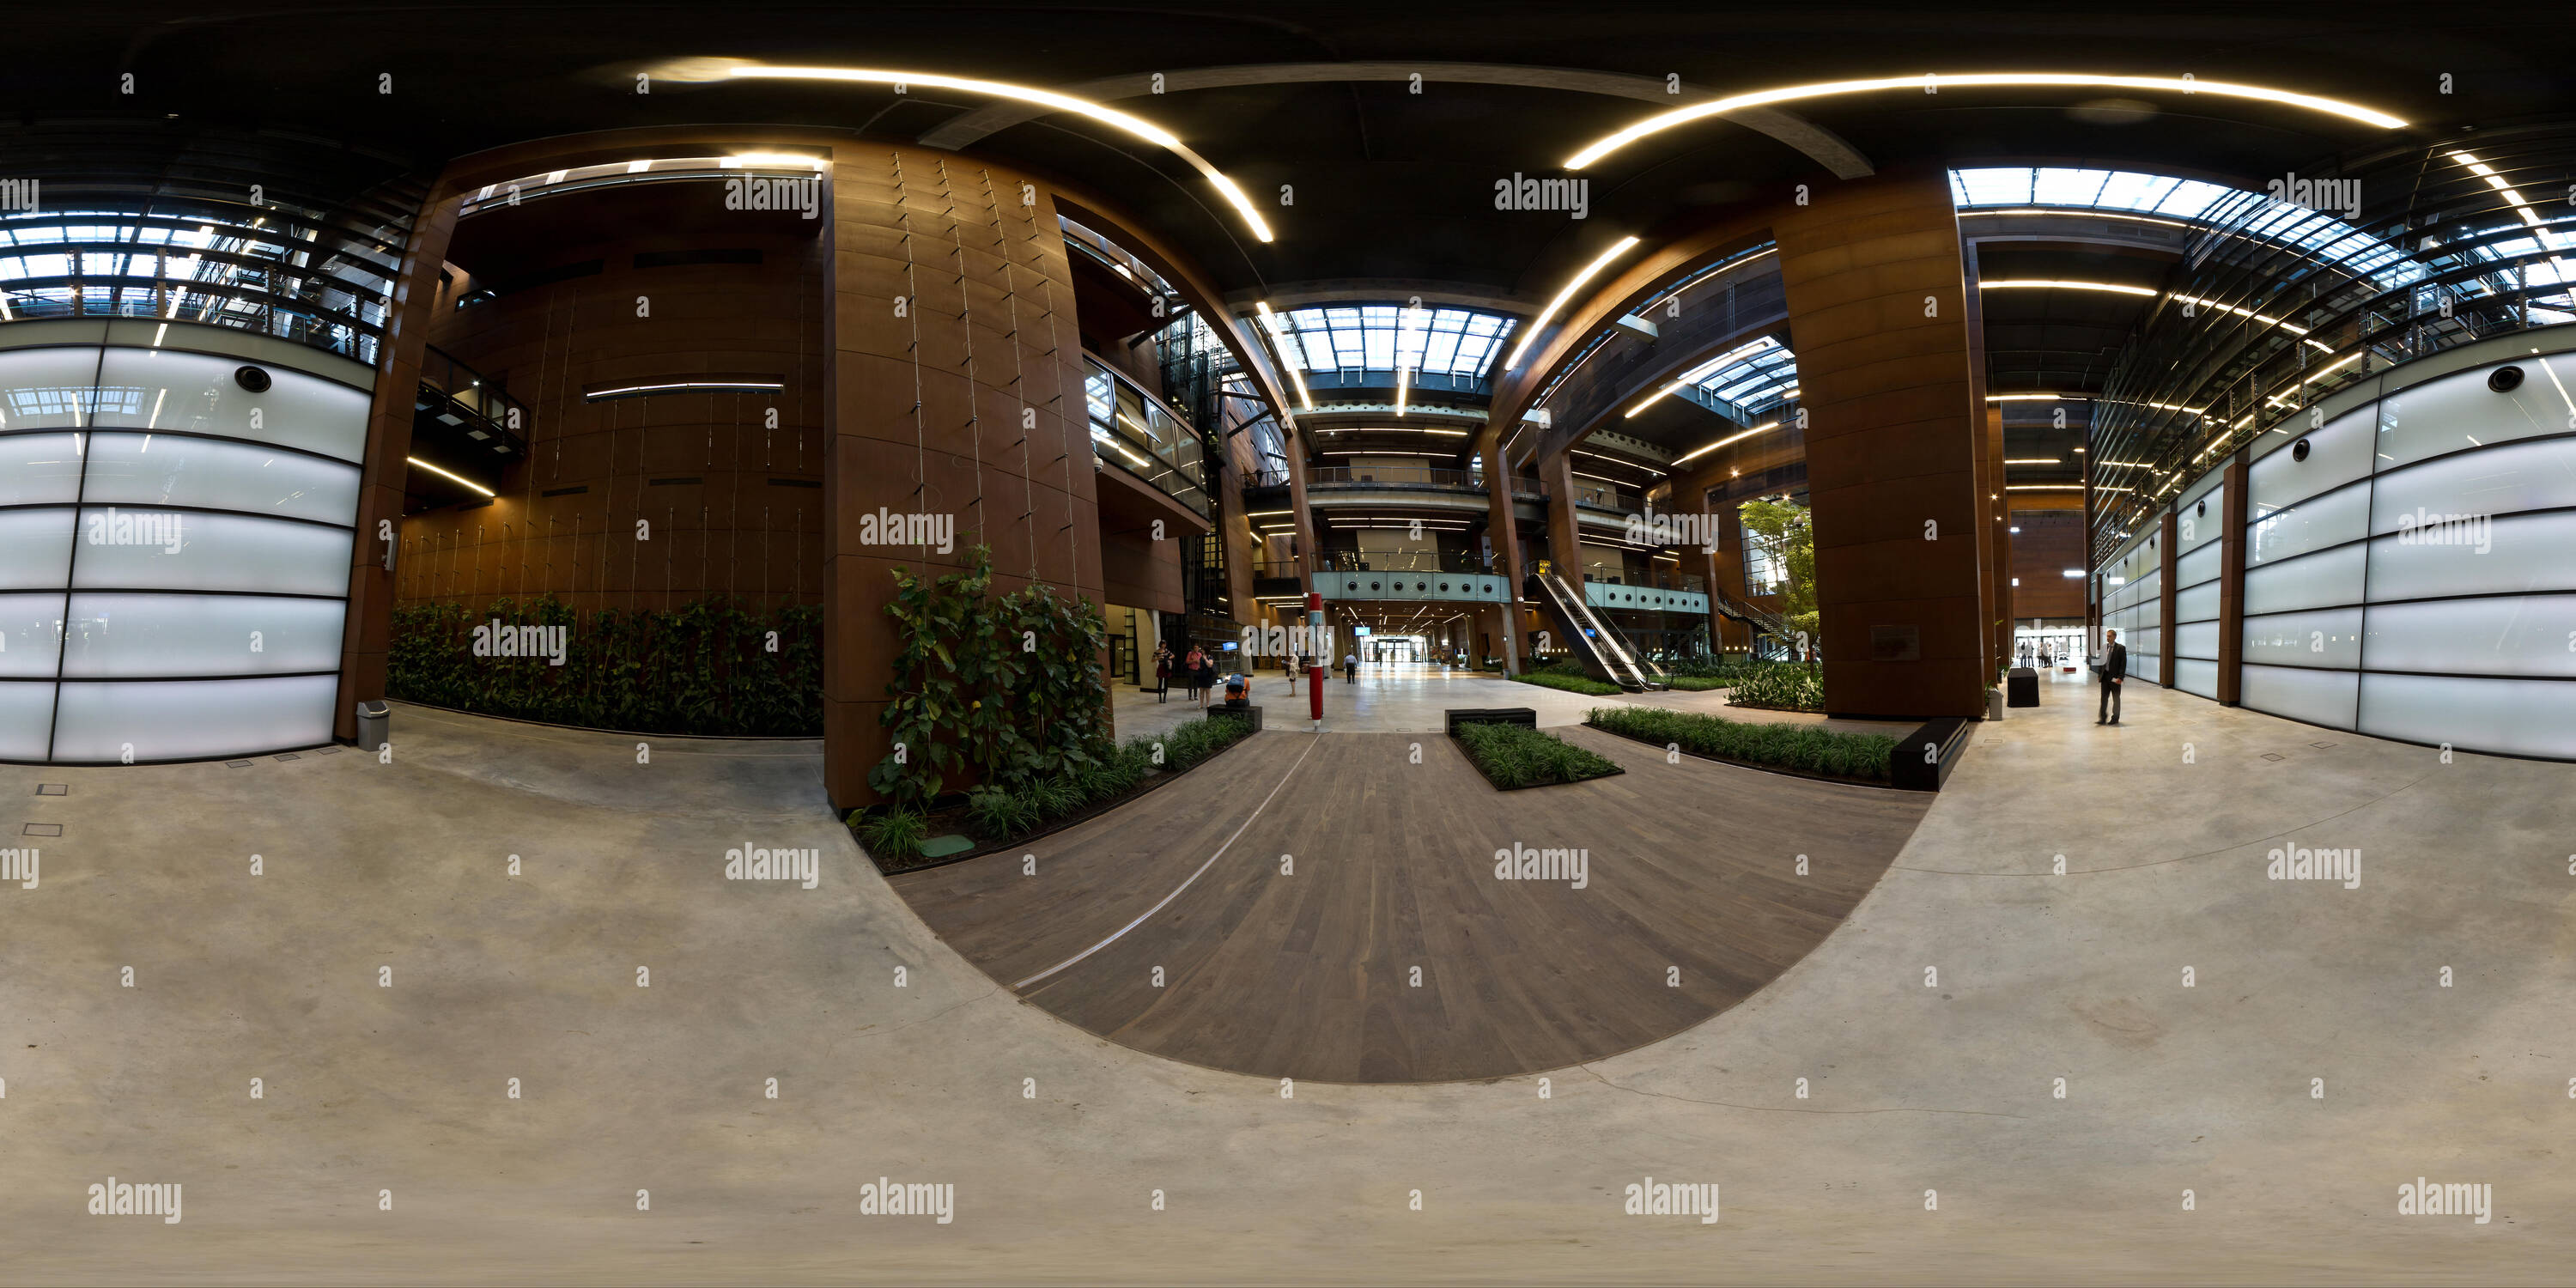 360 degree panoramic view of A 360 degree virtual tour of the European Solidarity Center in Gdansk, Poland.